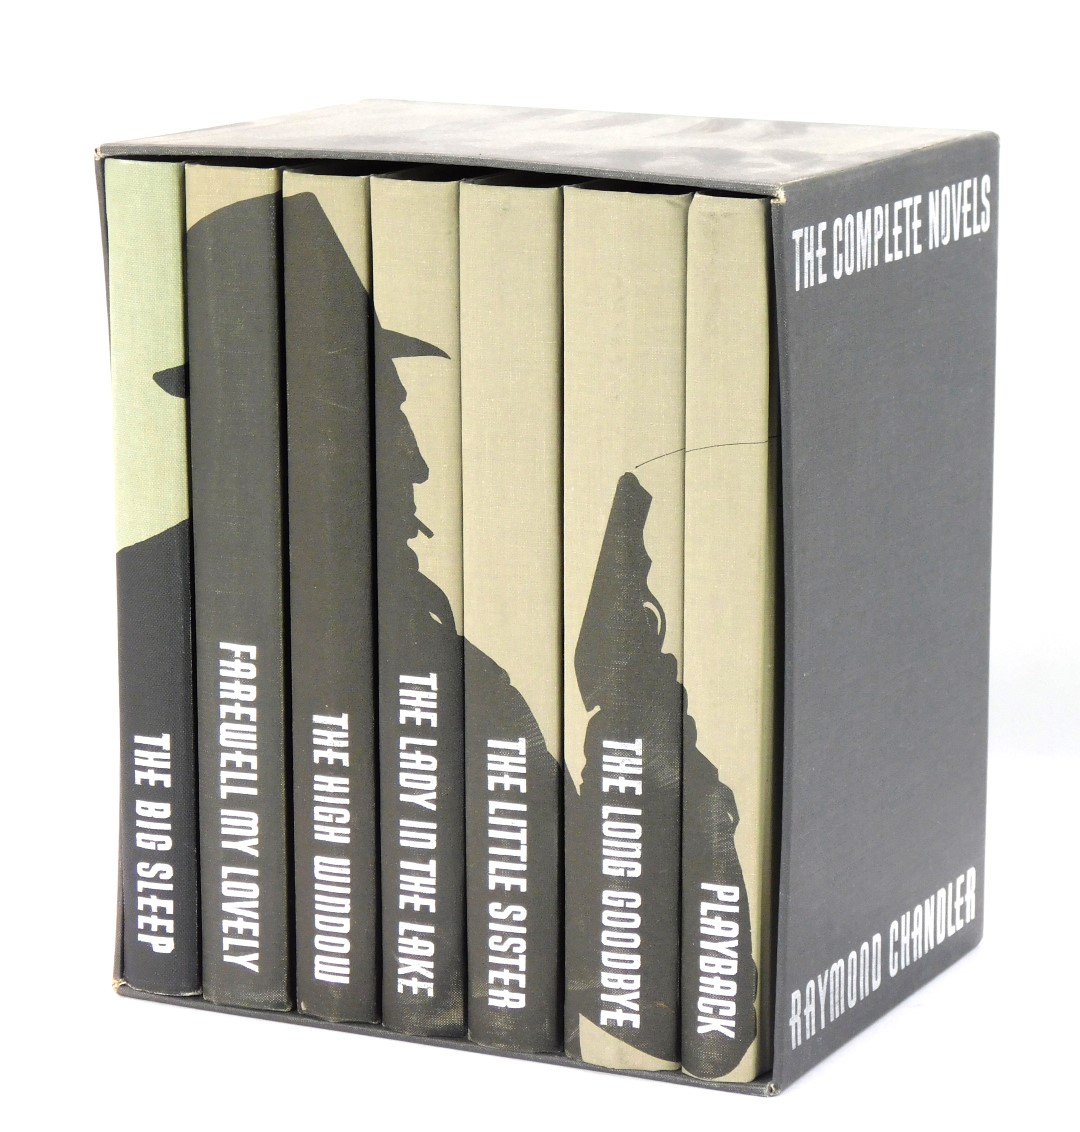 Chandler (Raymond). The Complete Novels, 7 vols, with slip case, published by The Folio Society 1989